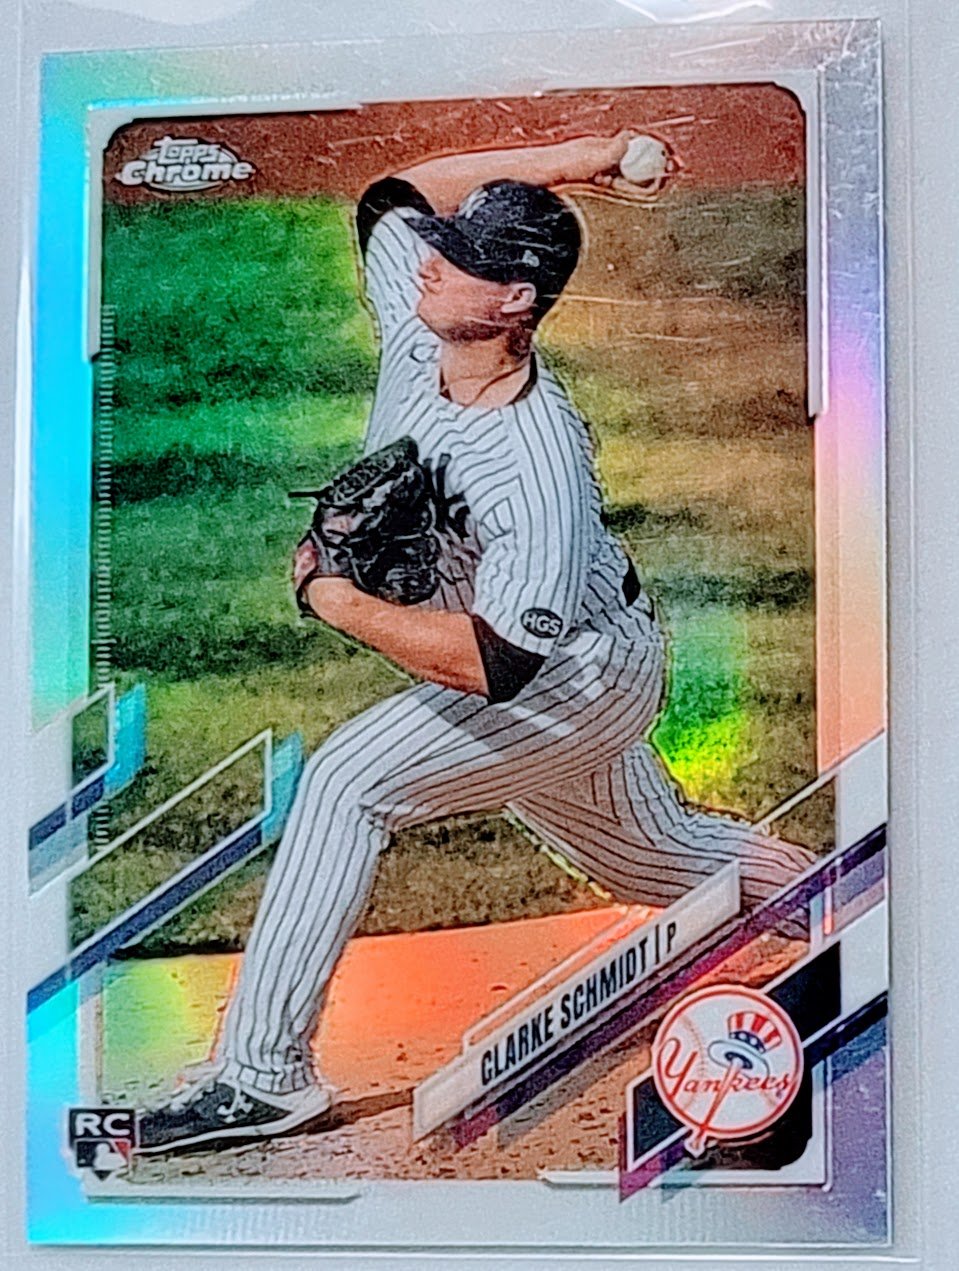 2021 Topps Chrome Clarke Schmidt Rookie Refractor Baseball Trading Card TPTV simple Xclusive Collectibles   